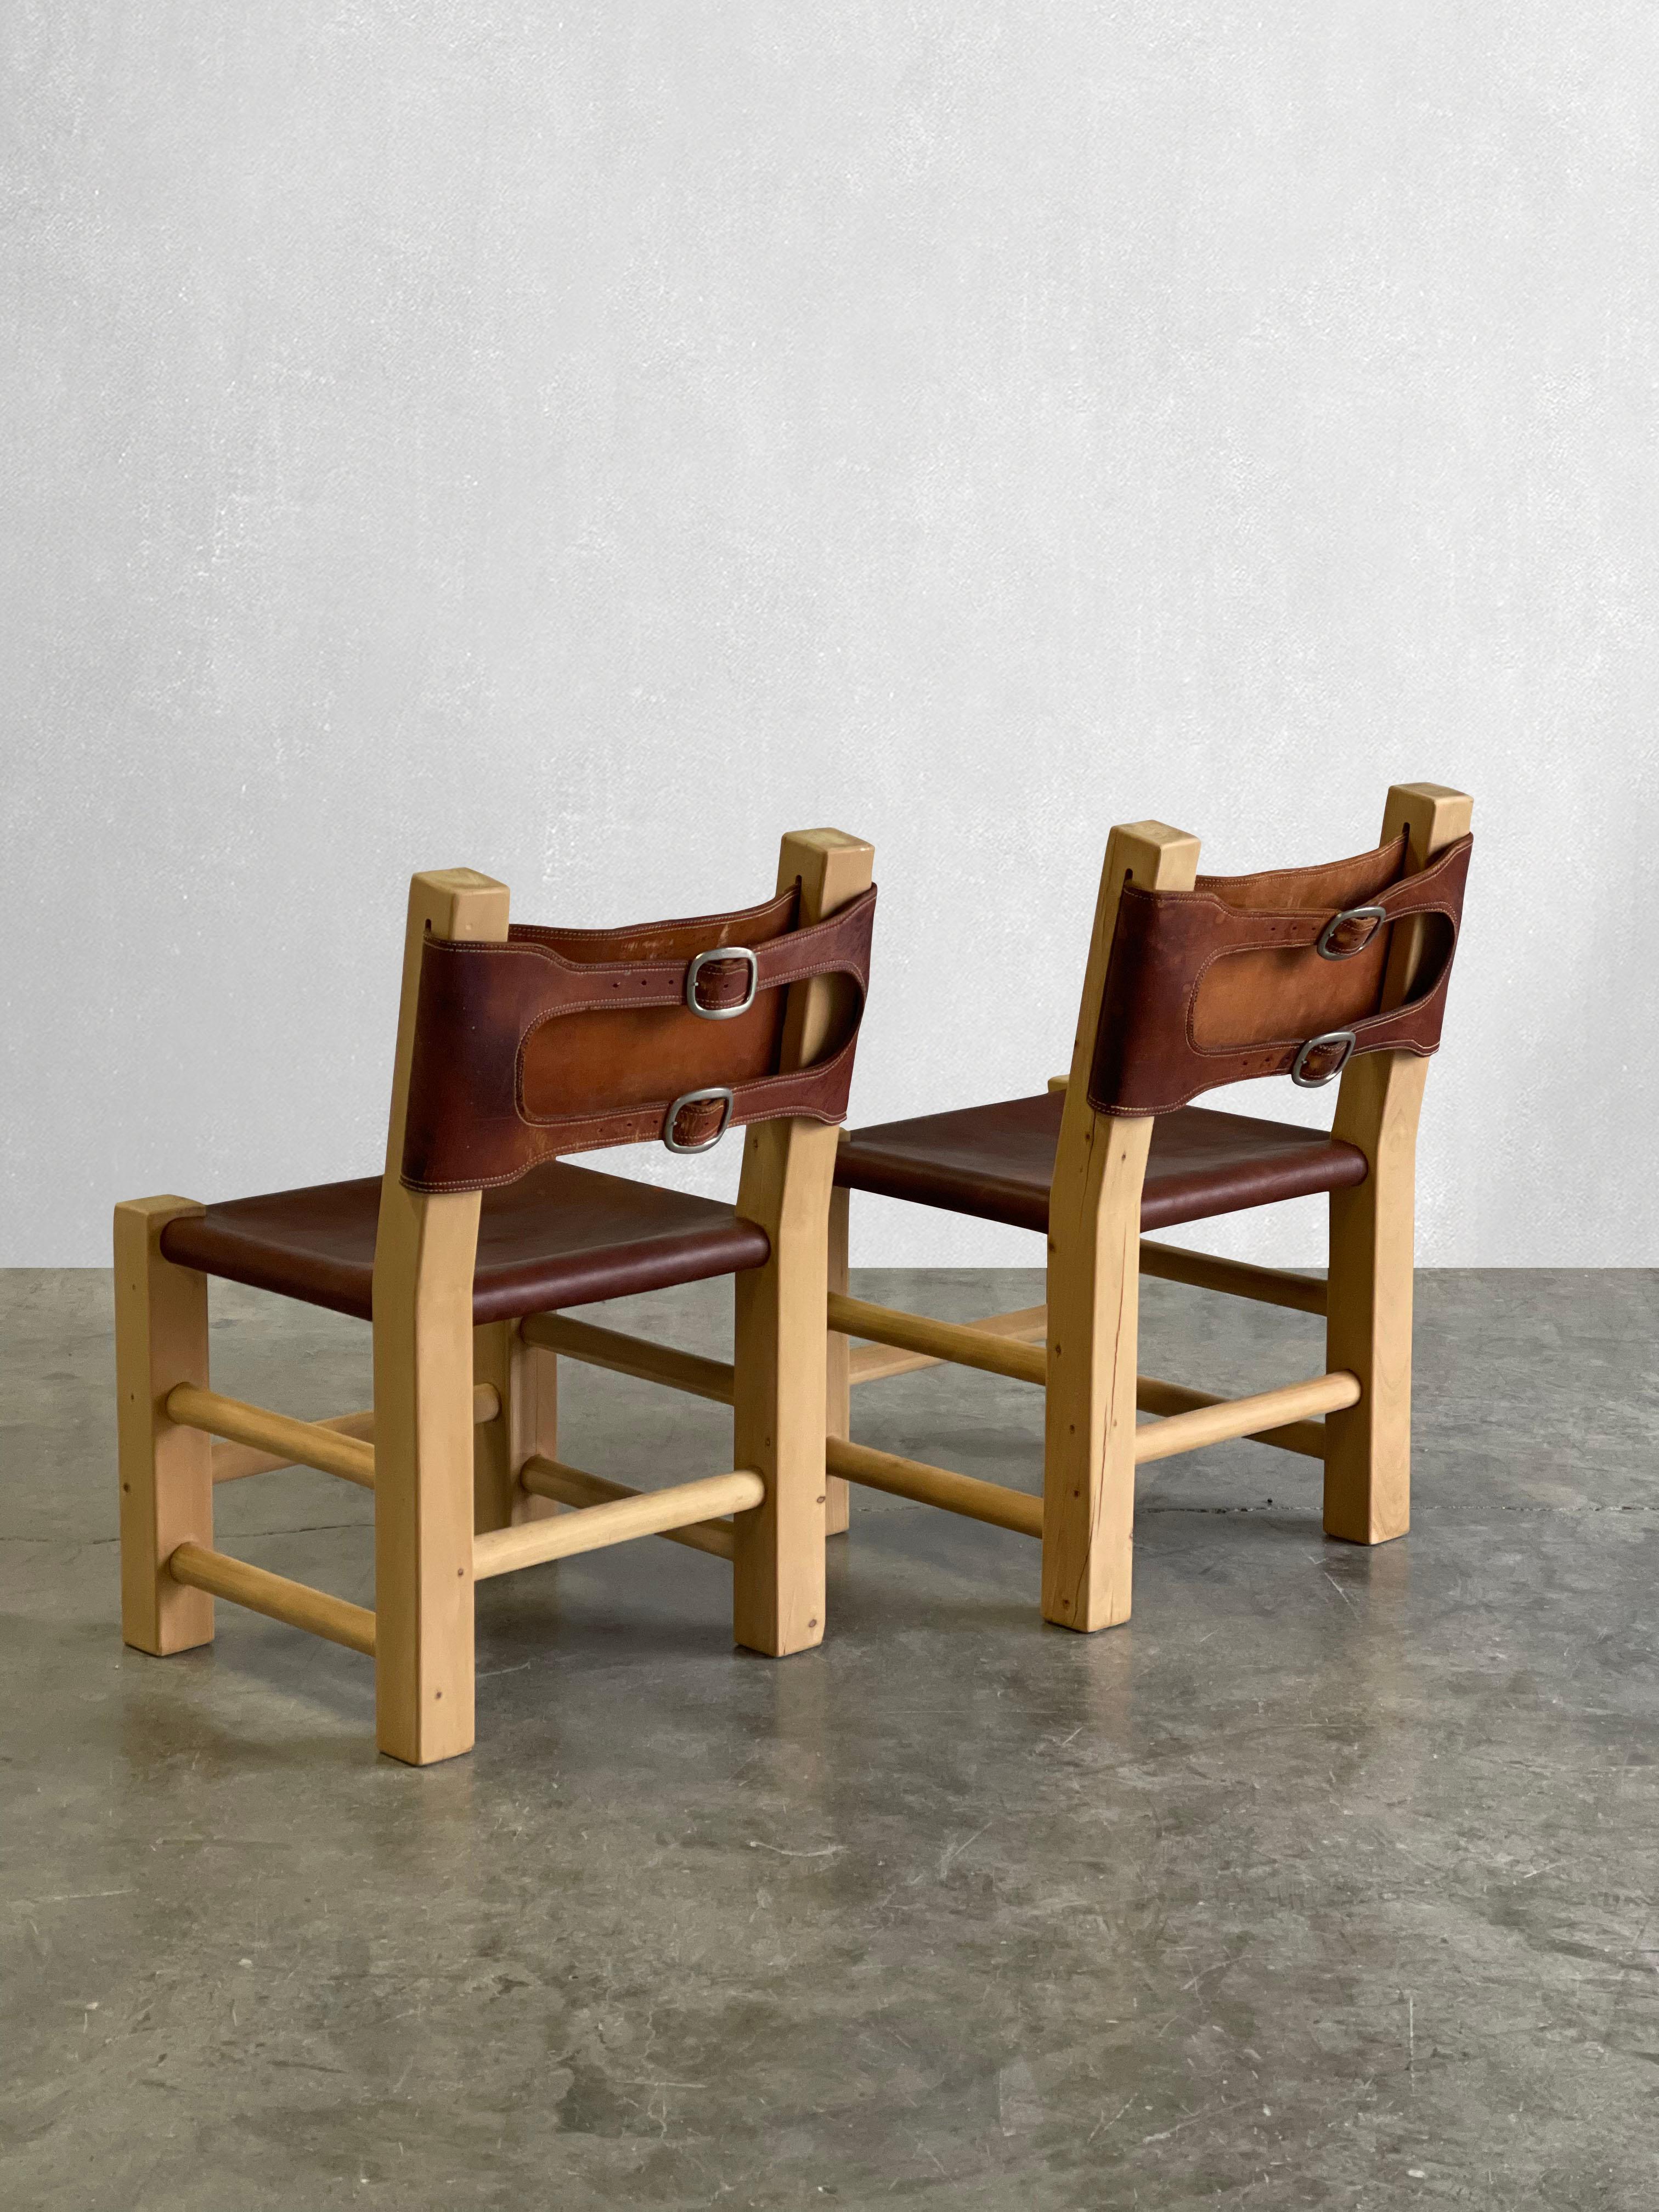 Late 20th Century Pair of Chunky Primitive Pine and Leather Chairs